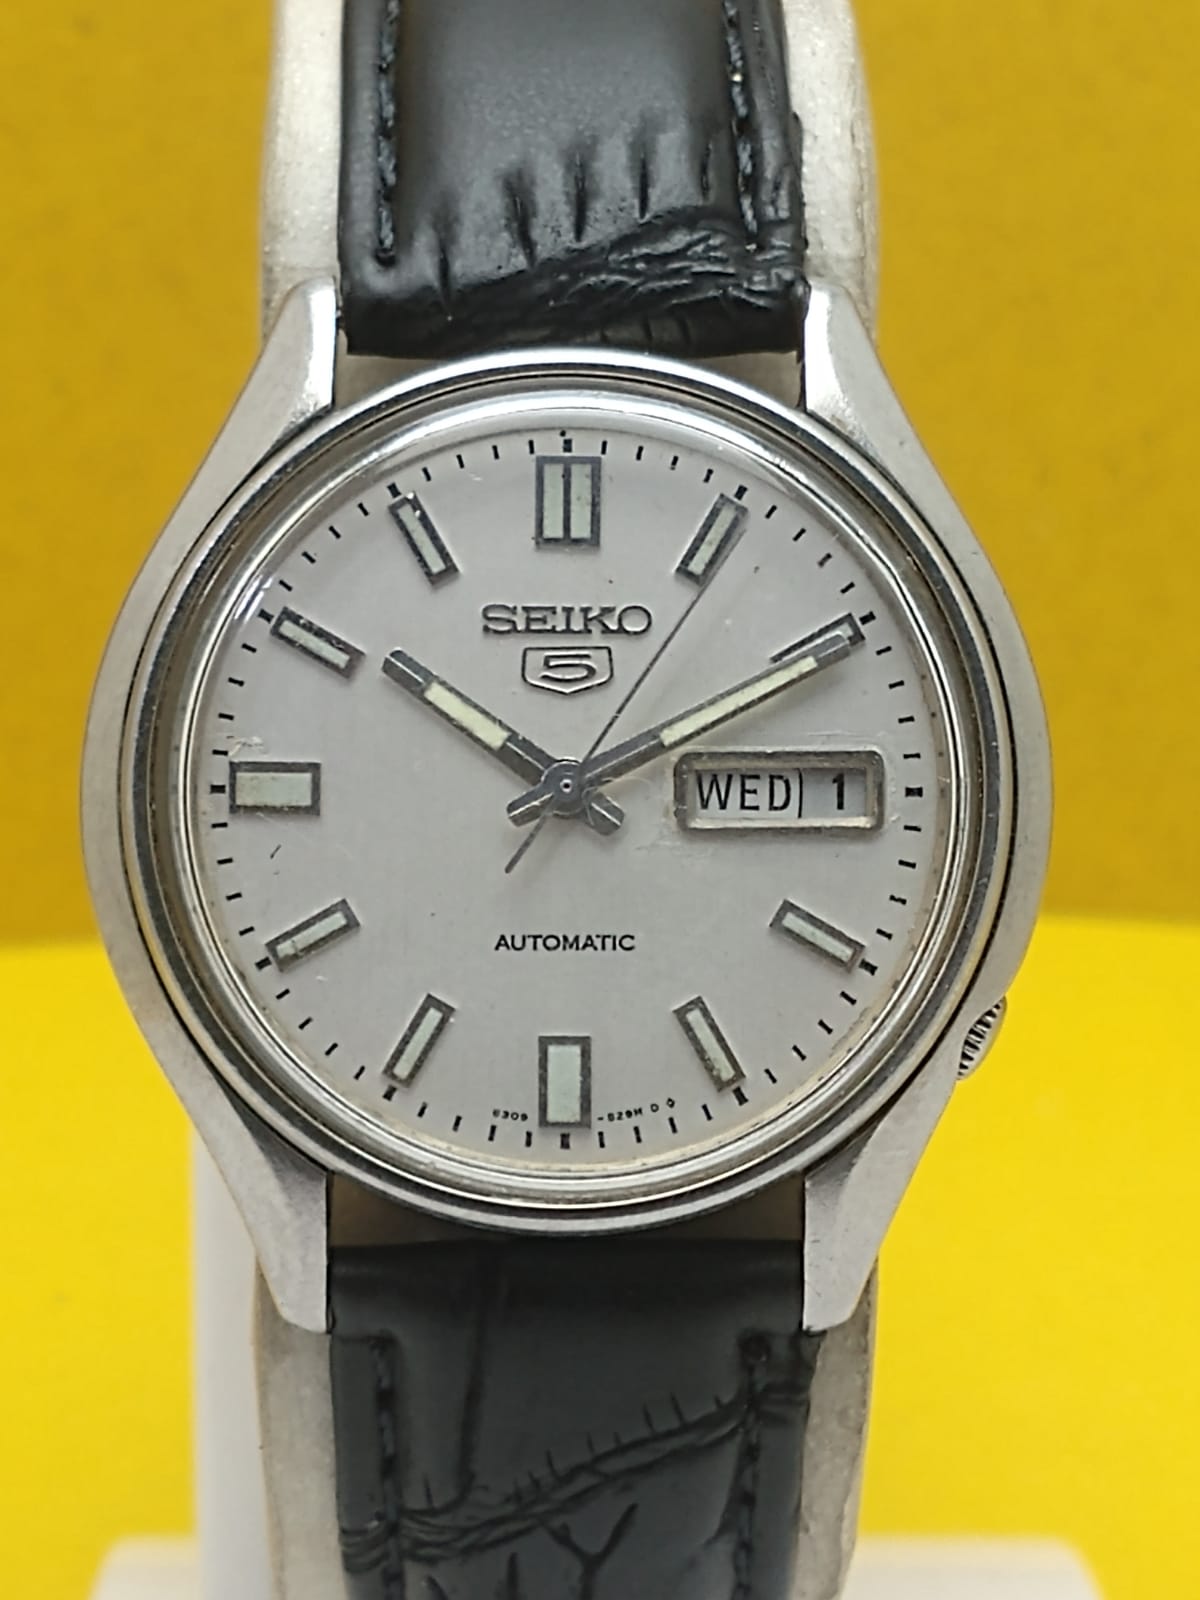 Seiko 5 Automatic 6309-8230 Day/Date Vintage Men's Watch BRG108MJ1 ...